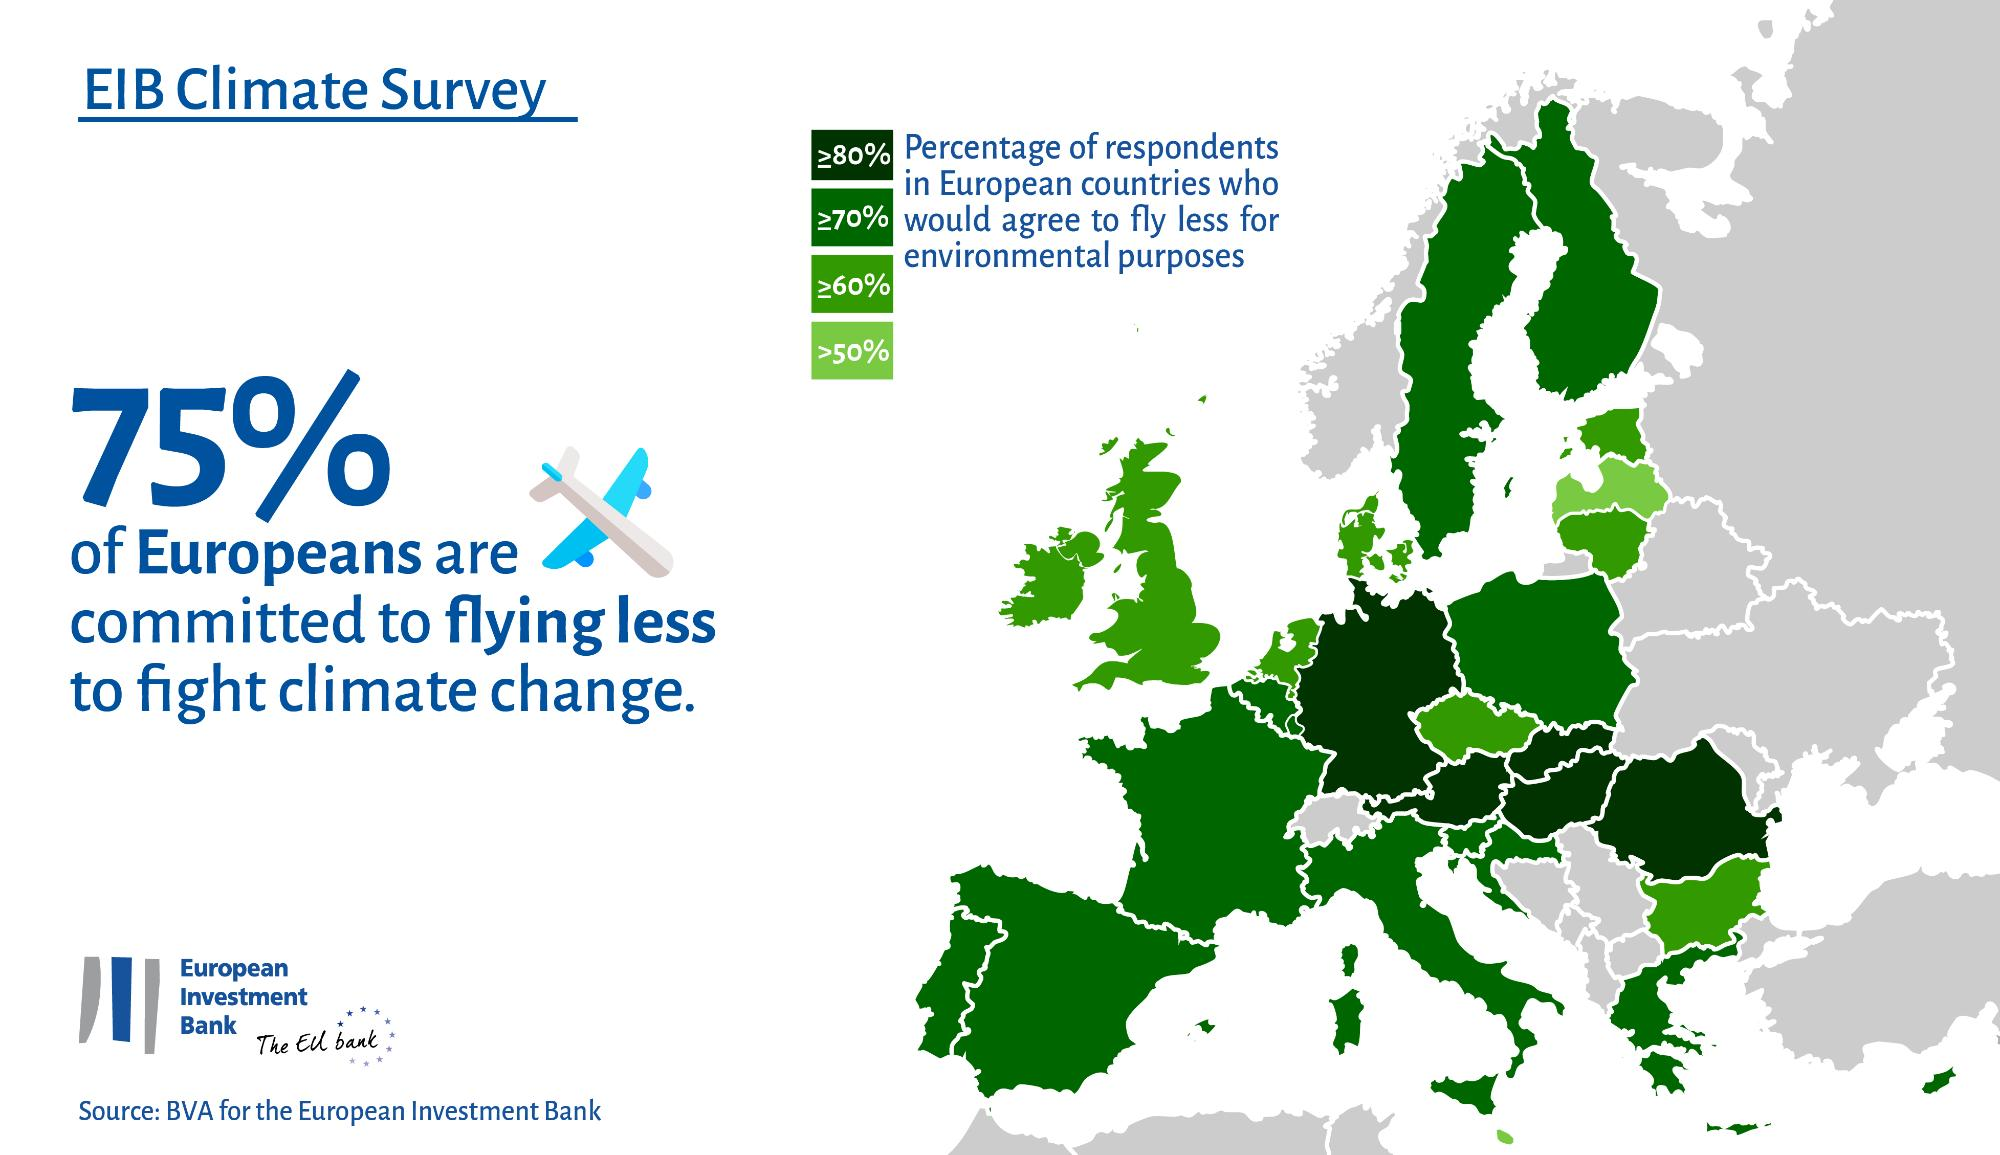 Air transportation: 3 out of 4 Europeans committed to flying less